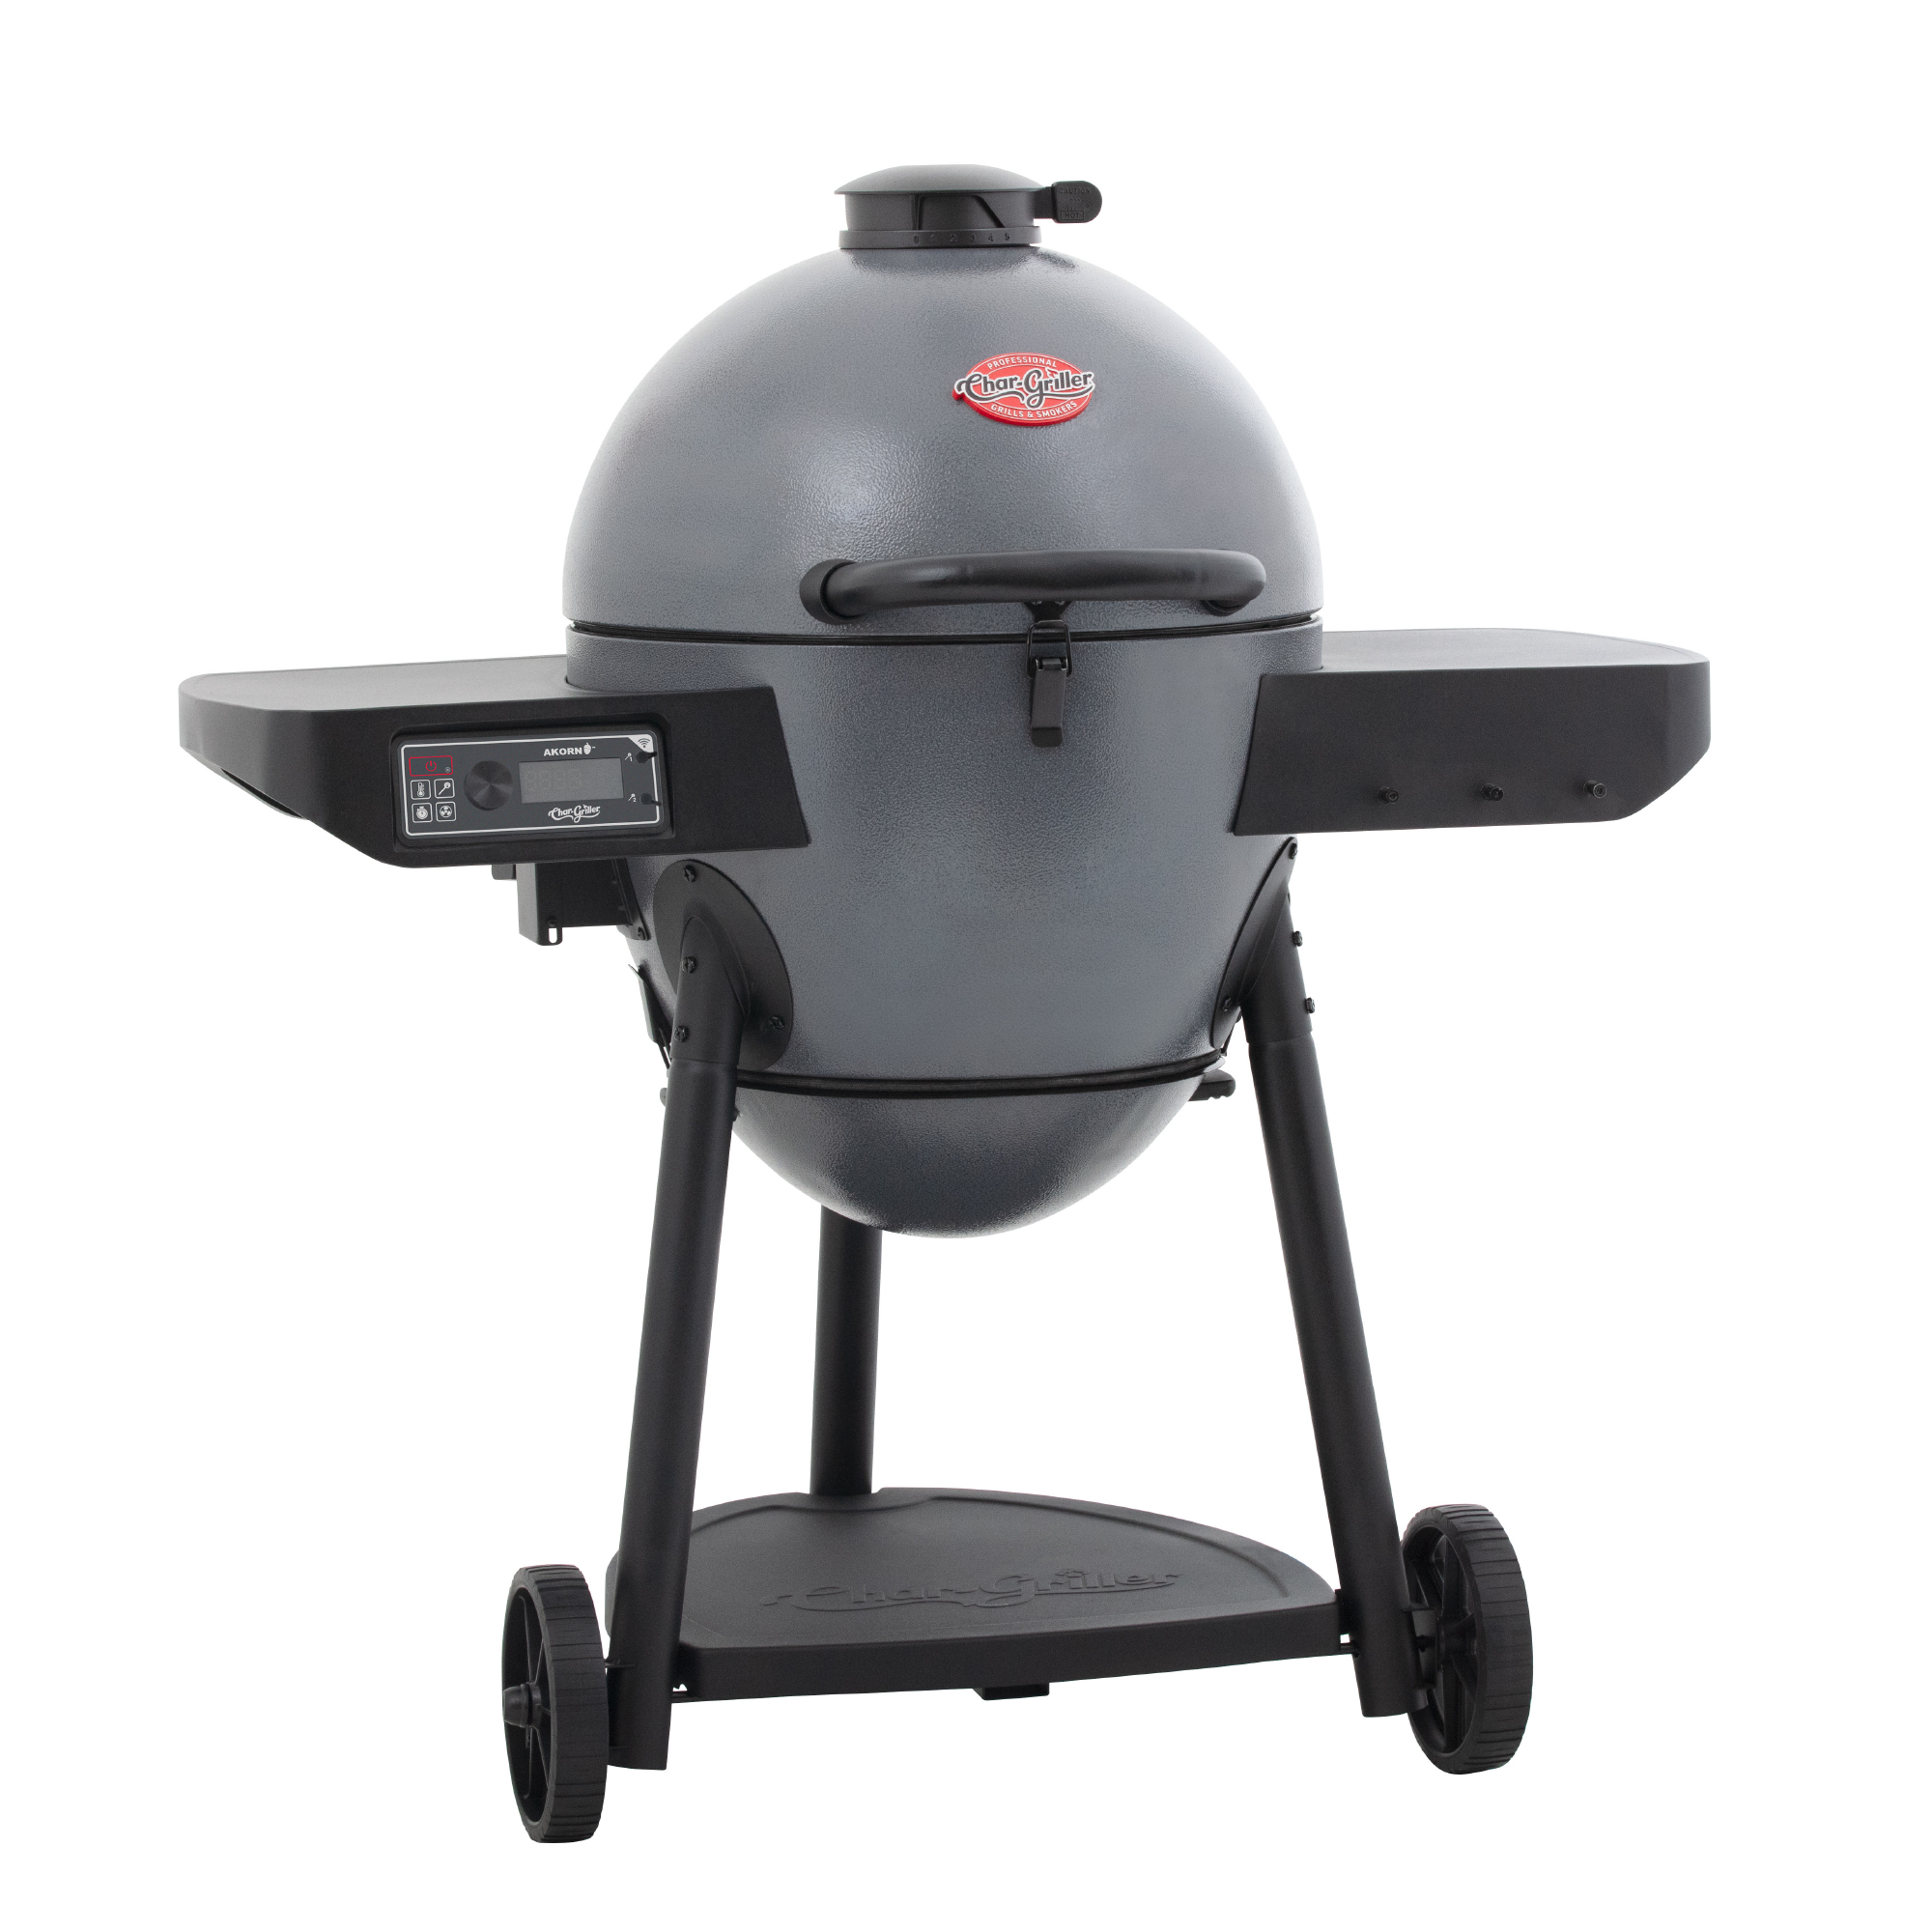 Auto Kamado Charcoal Grill in Gray - image 3 of 15